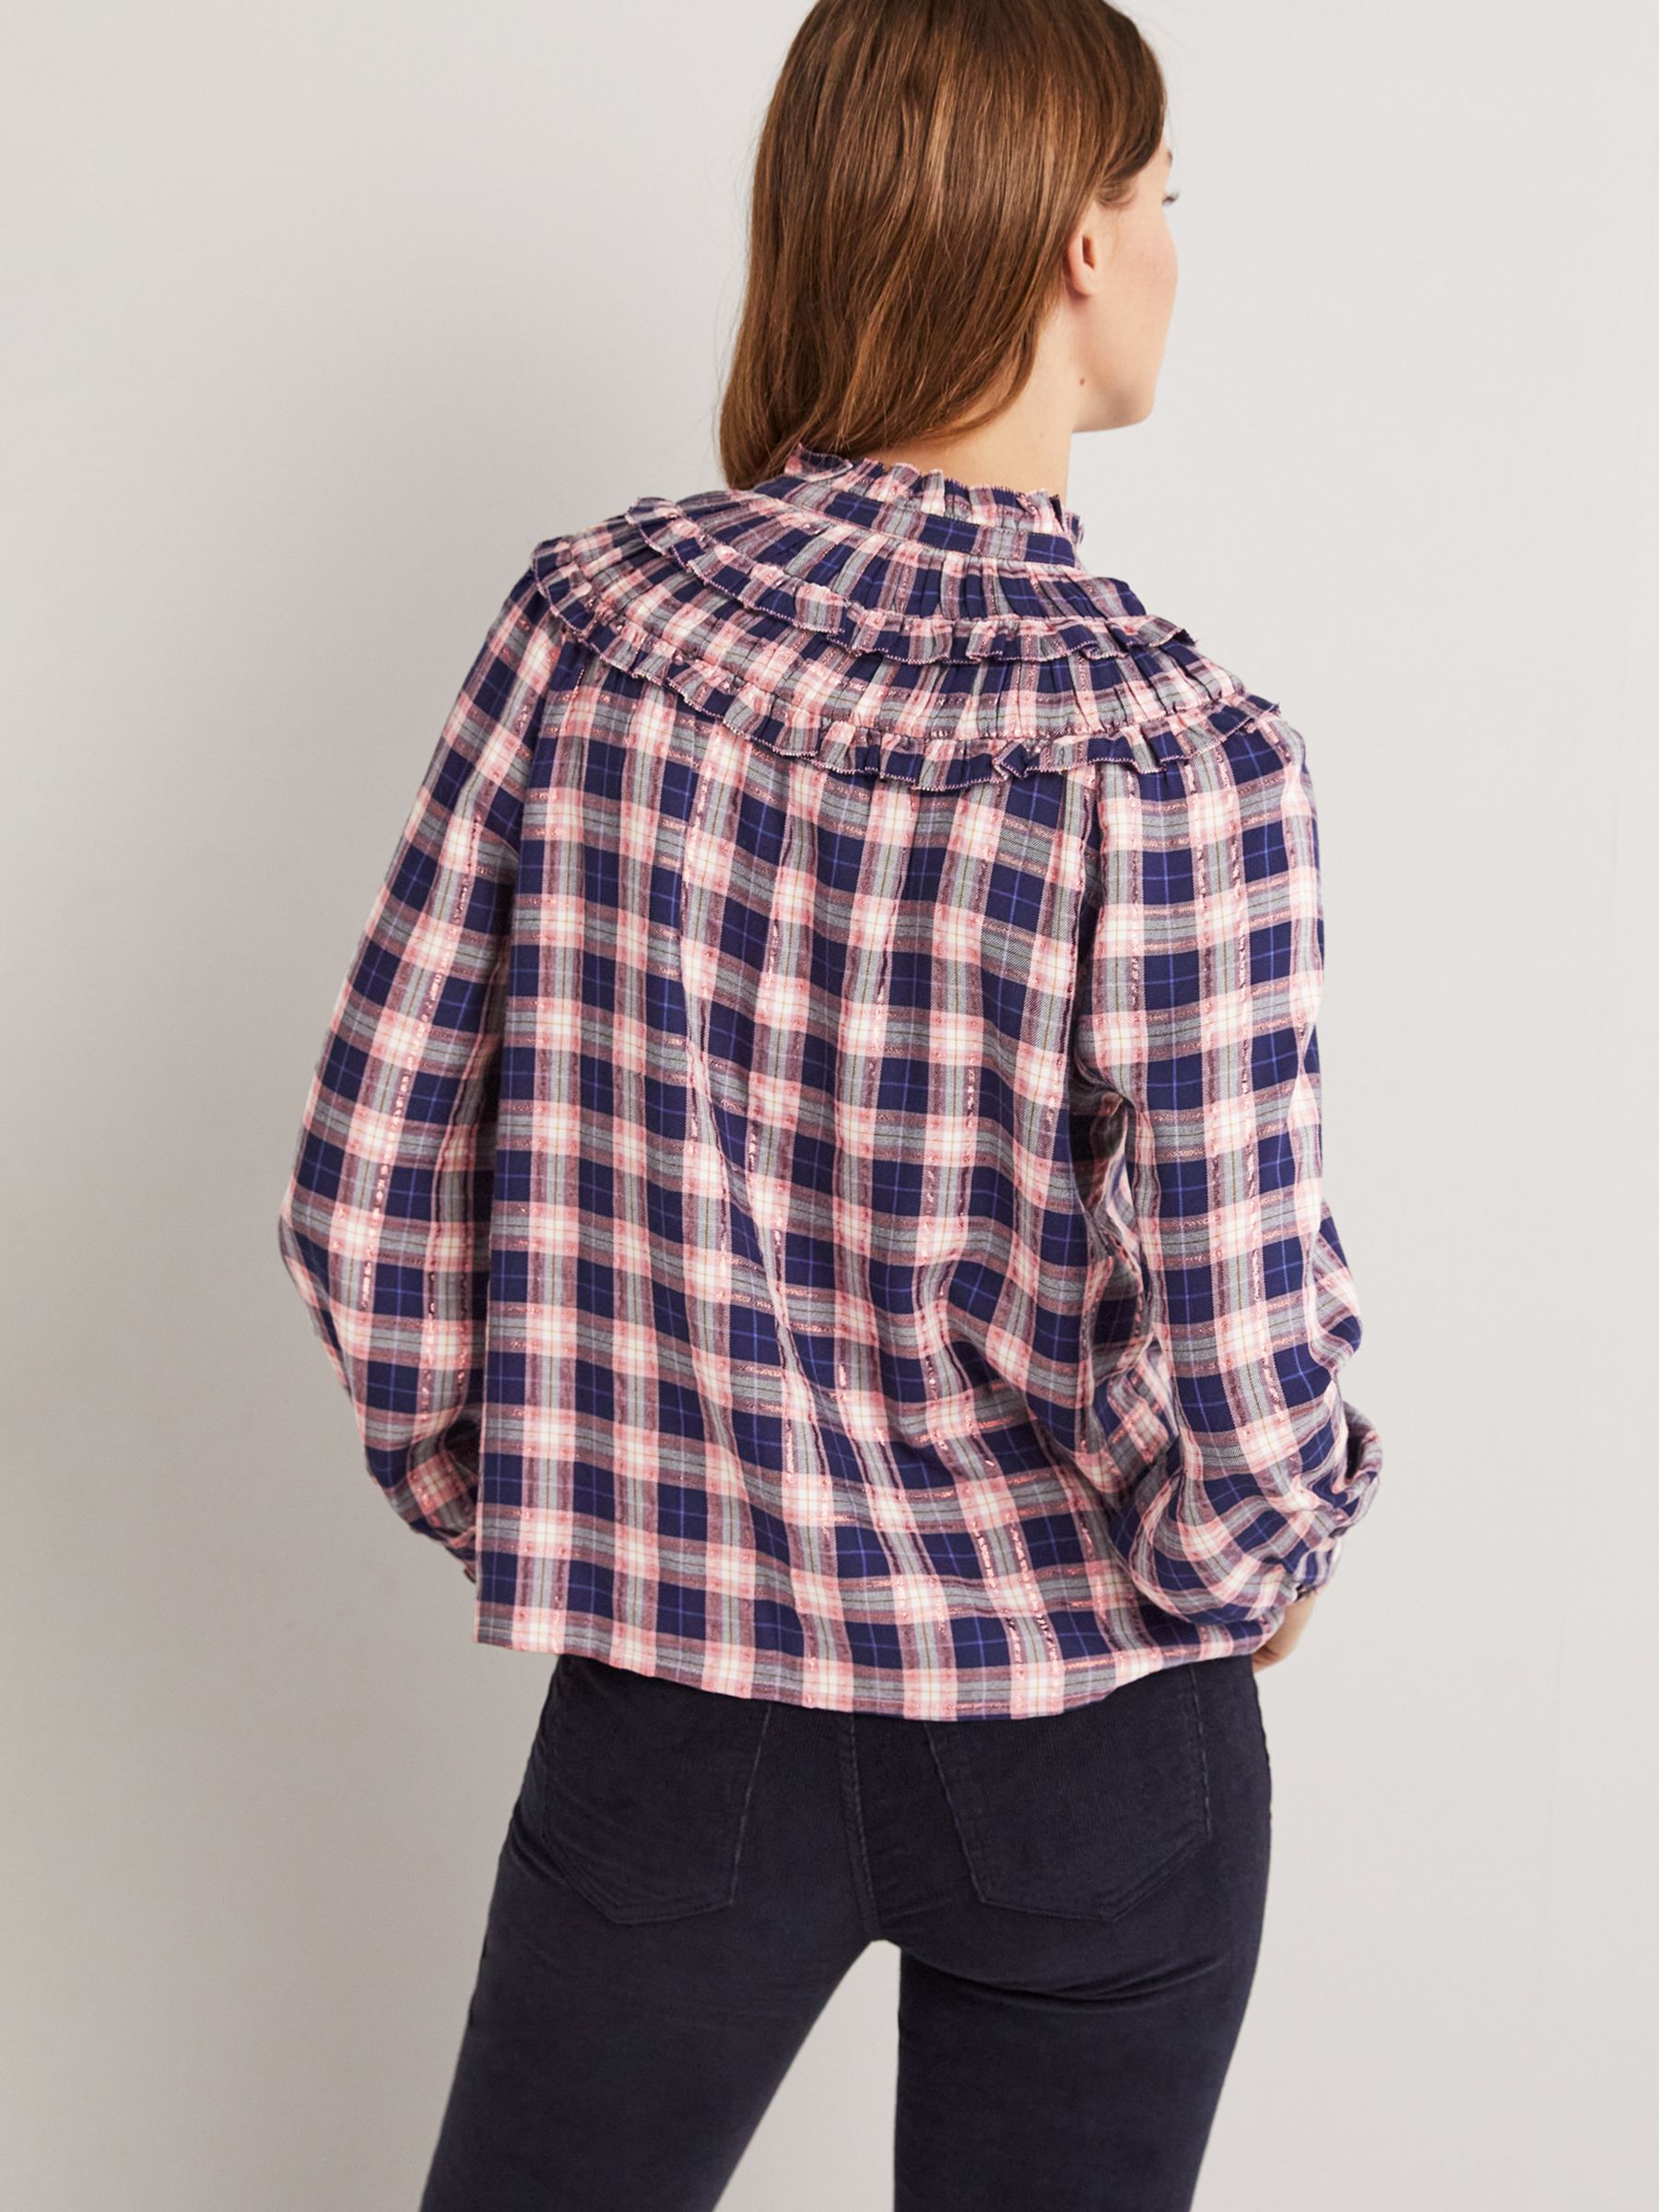 Buy Boden Check High Frill Neck Blouse, Navy/Multi Online at johnlewis.com